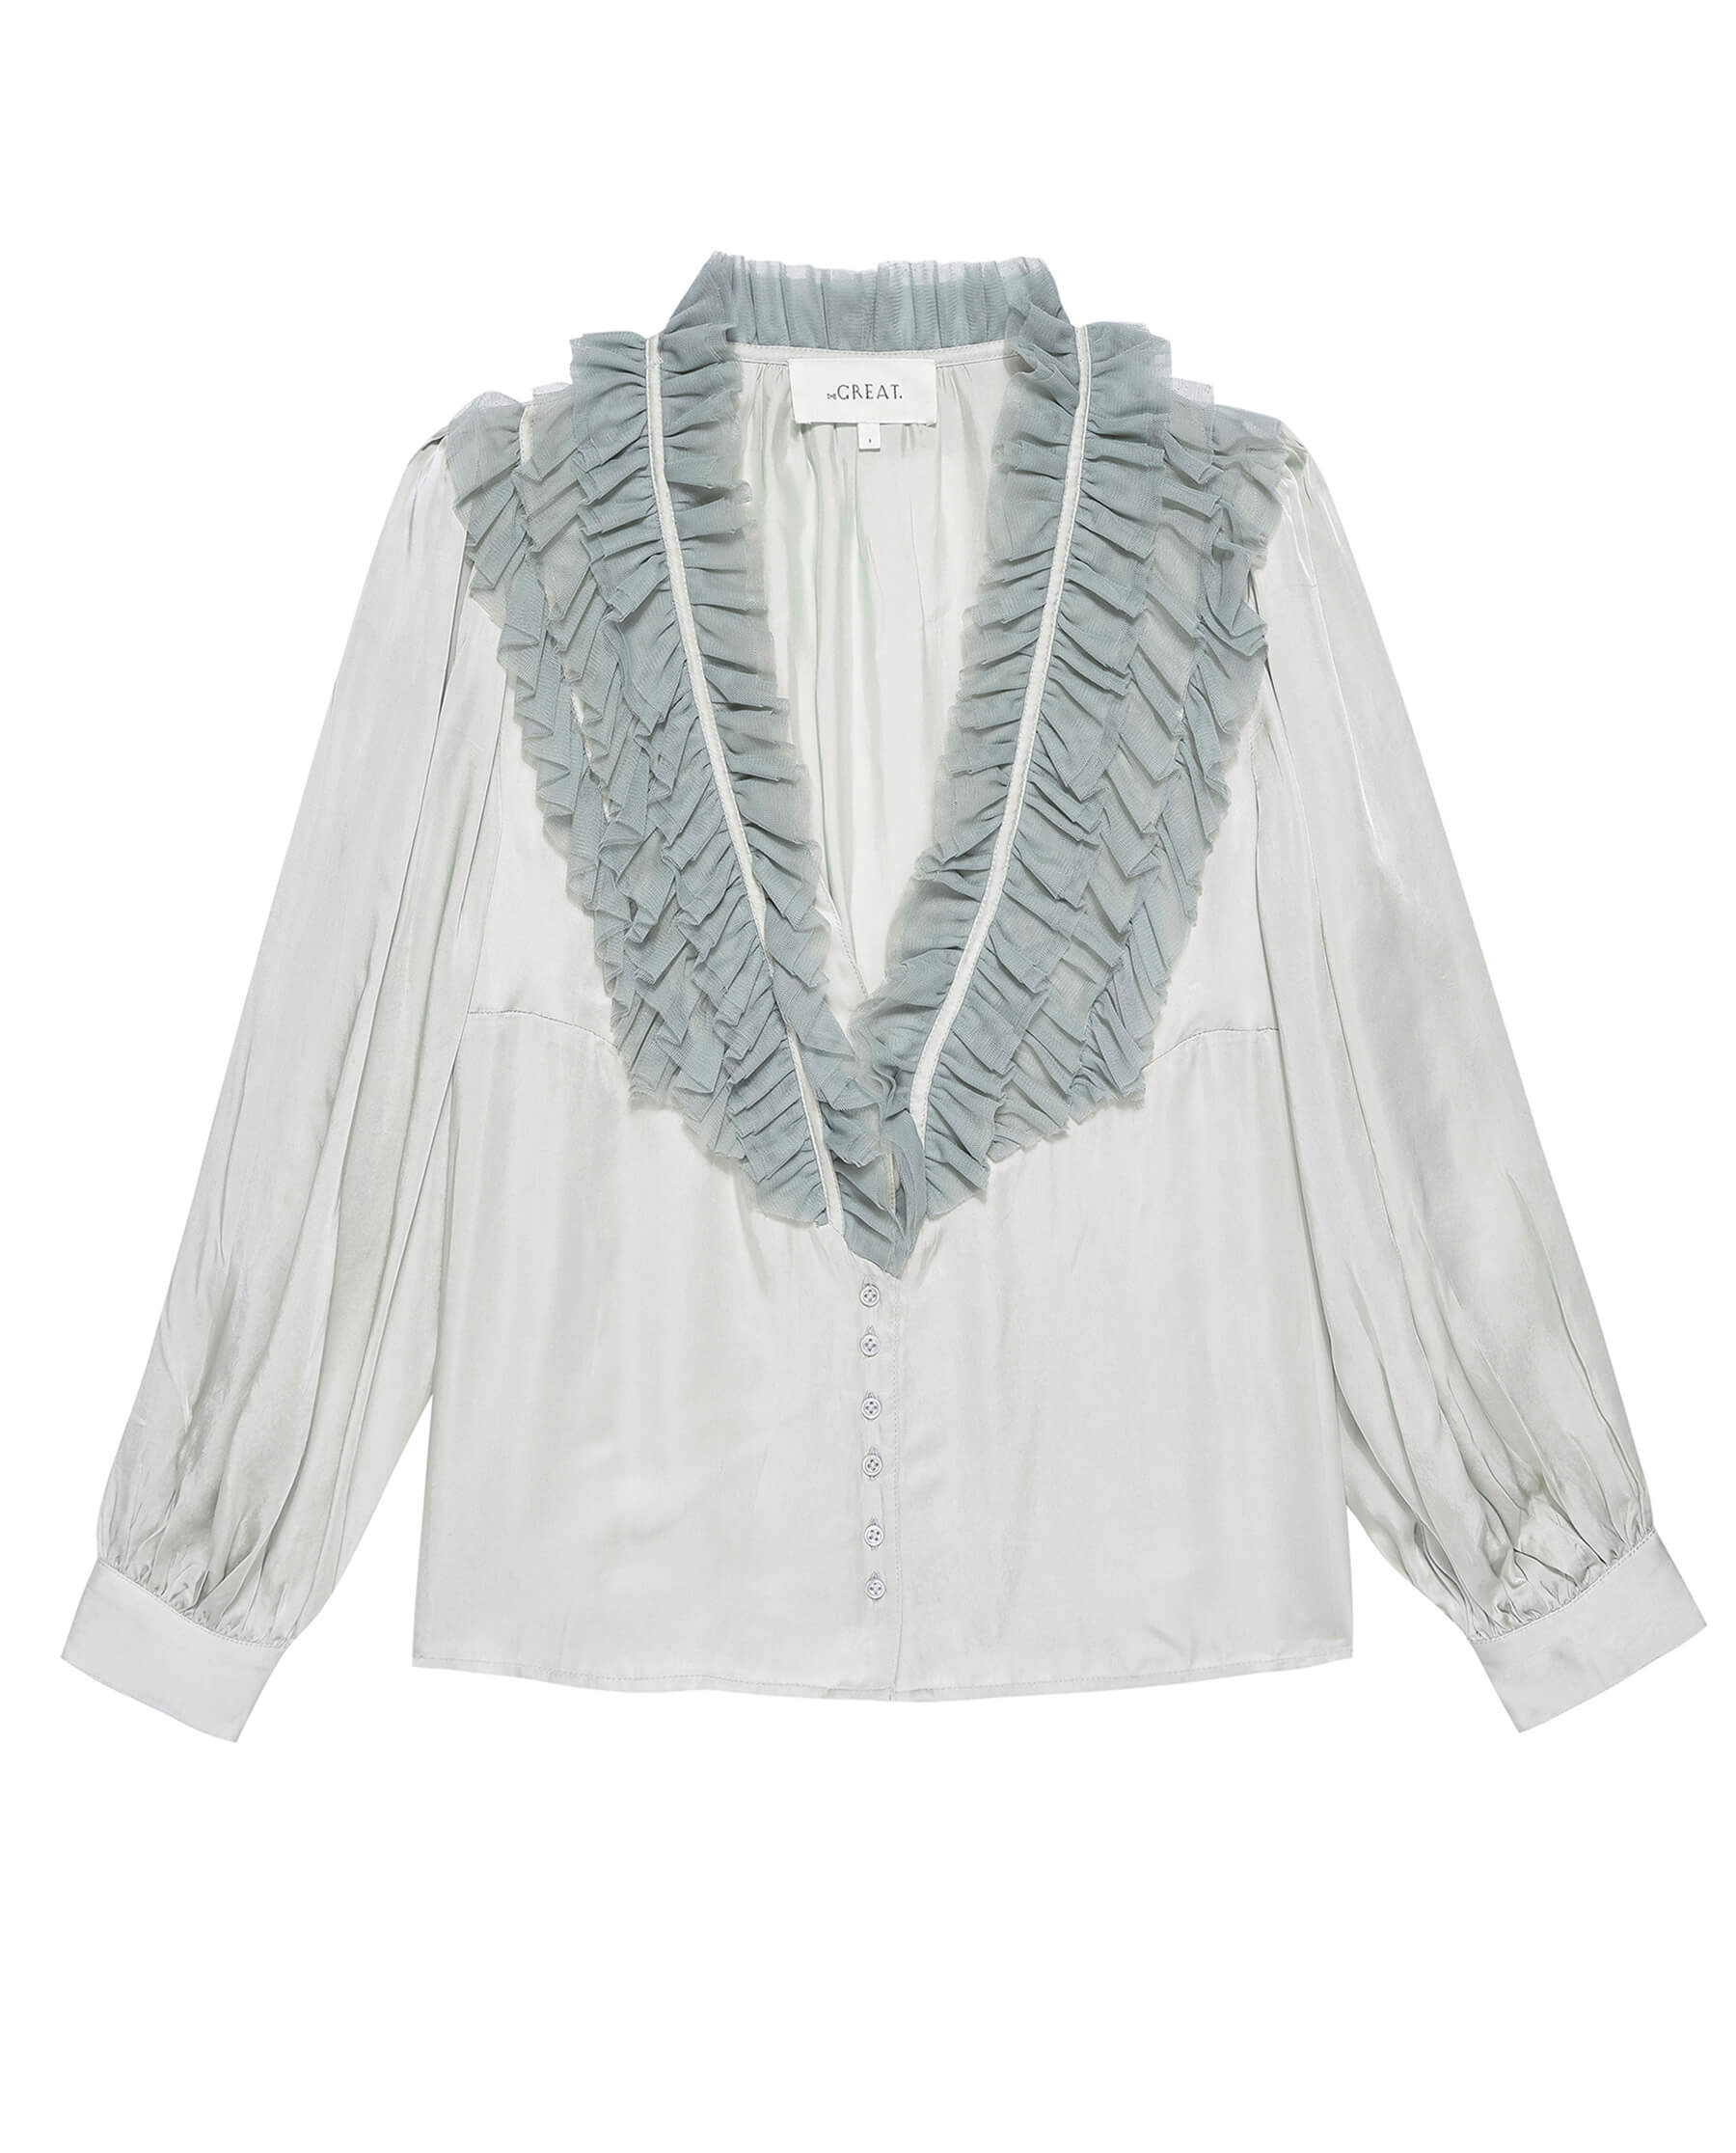 The Ruffled Tuxedo Top. -- Silver with Icy Blue